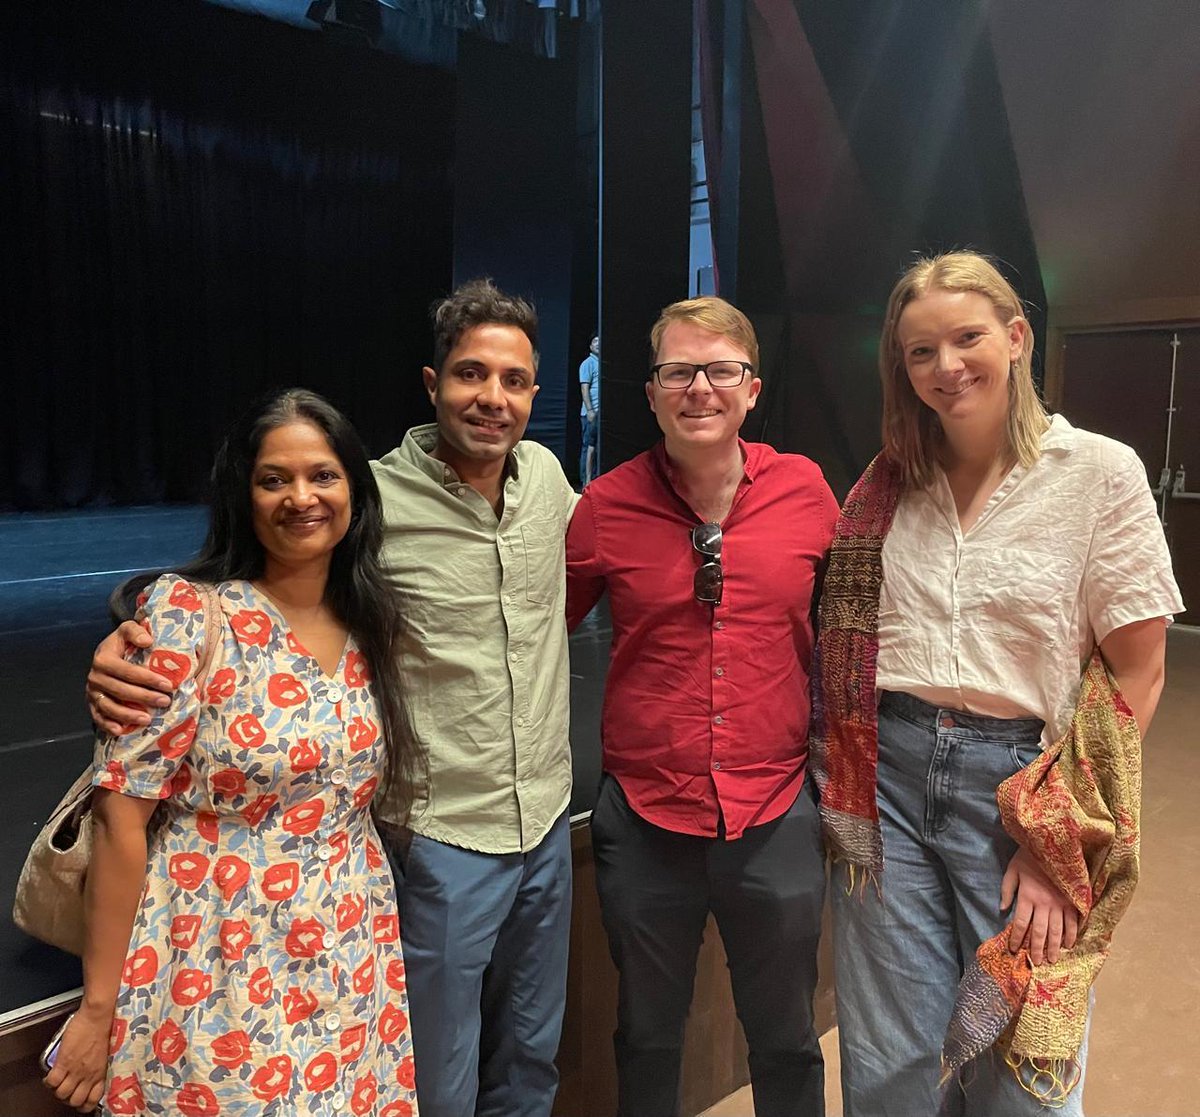 Consul Andrew & Vice Consul Harriet attended a preview of Raghav Handa's dance project 'Superhero' @bicblr. Great to meet some of the creative team involved in this @AusIndiaCentre-supported project, incl. the brilliant @MDPallavi. Can't wait to see where this 🇦🇺-🇮🇳 collab goes!